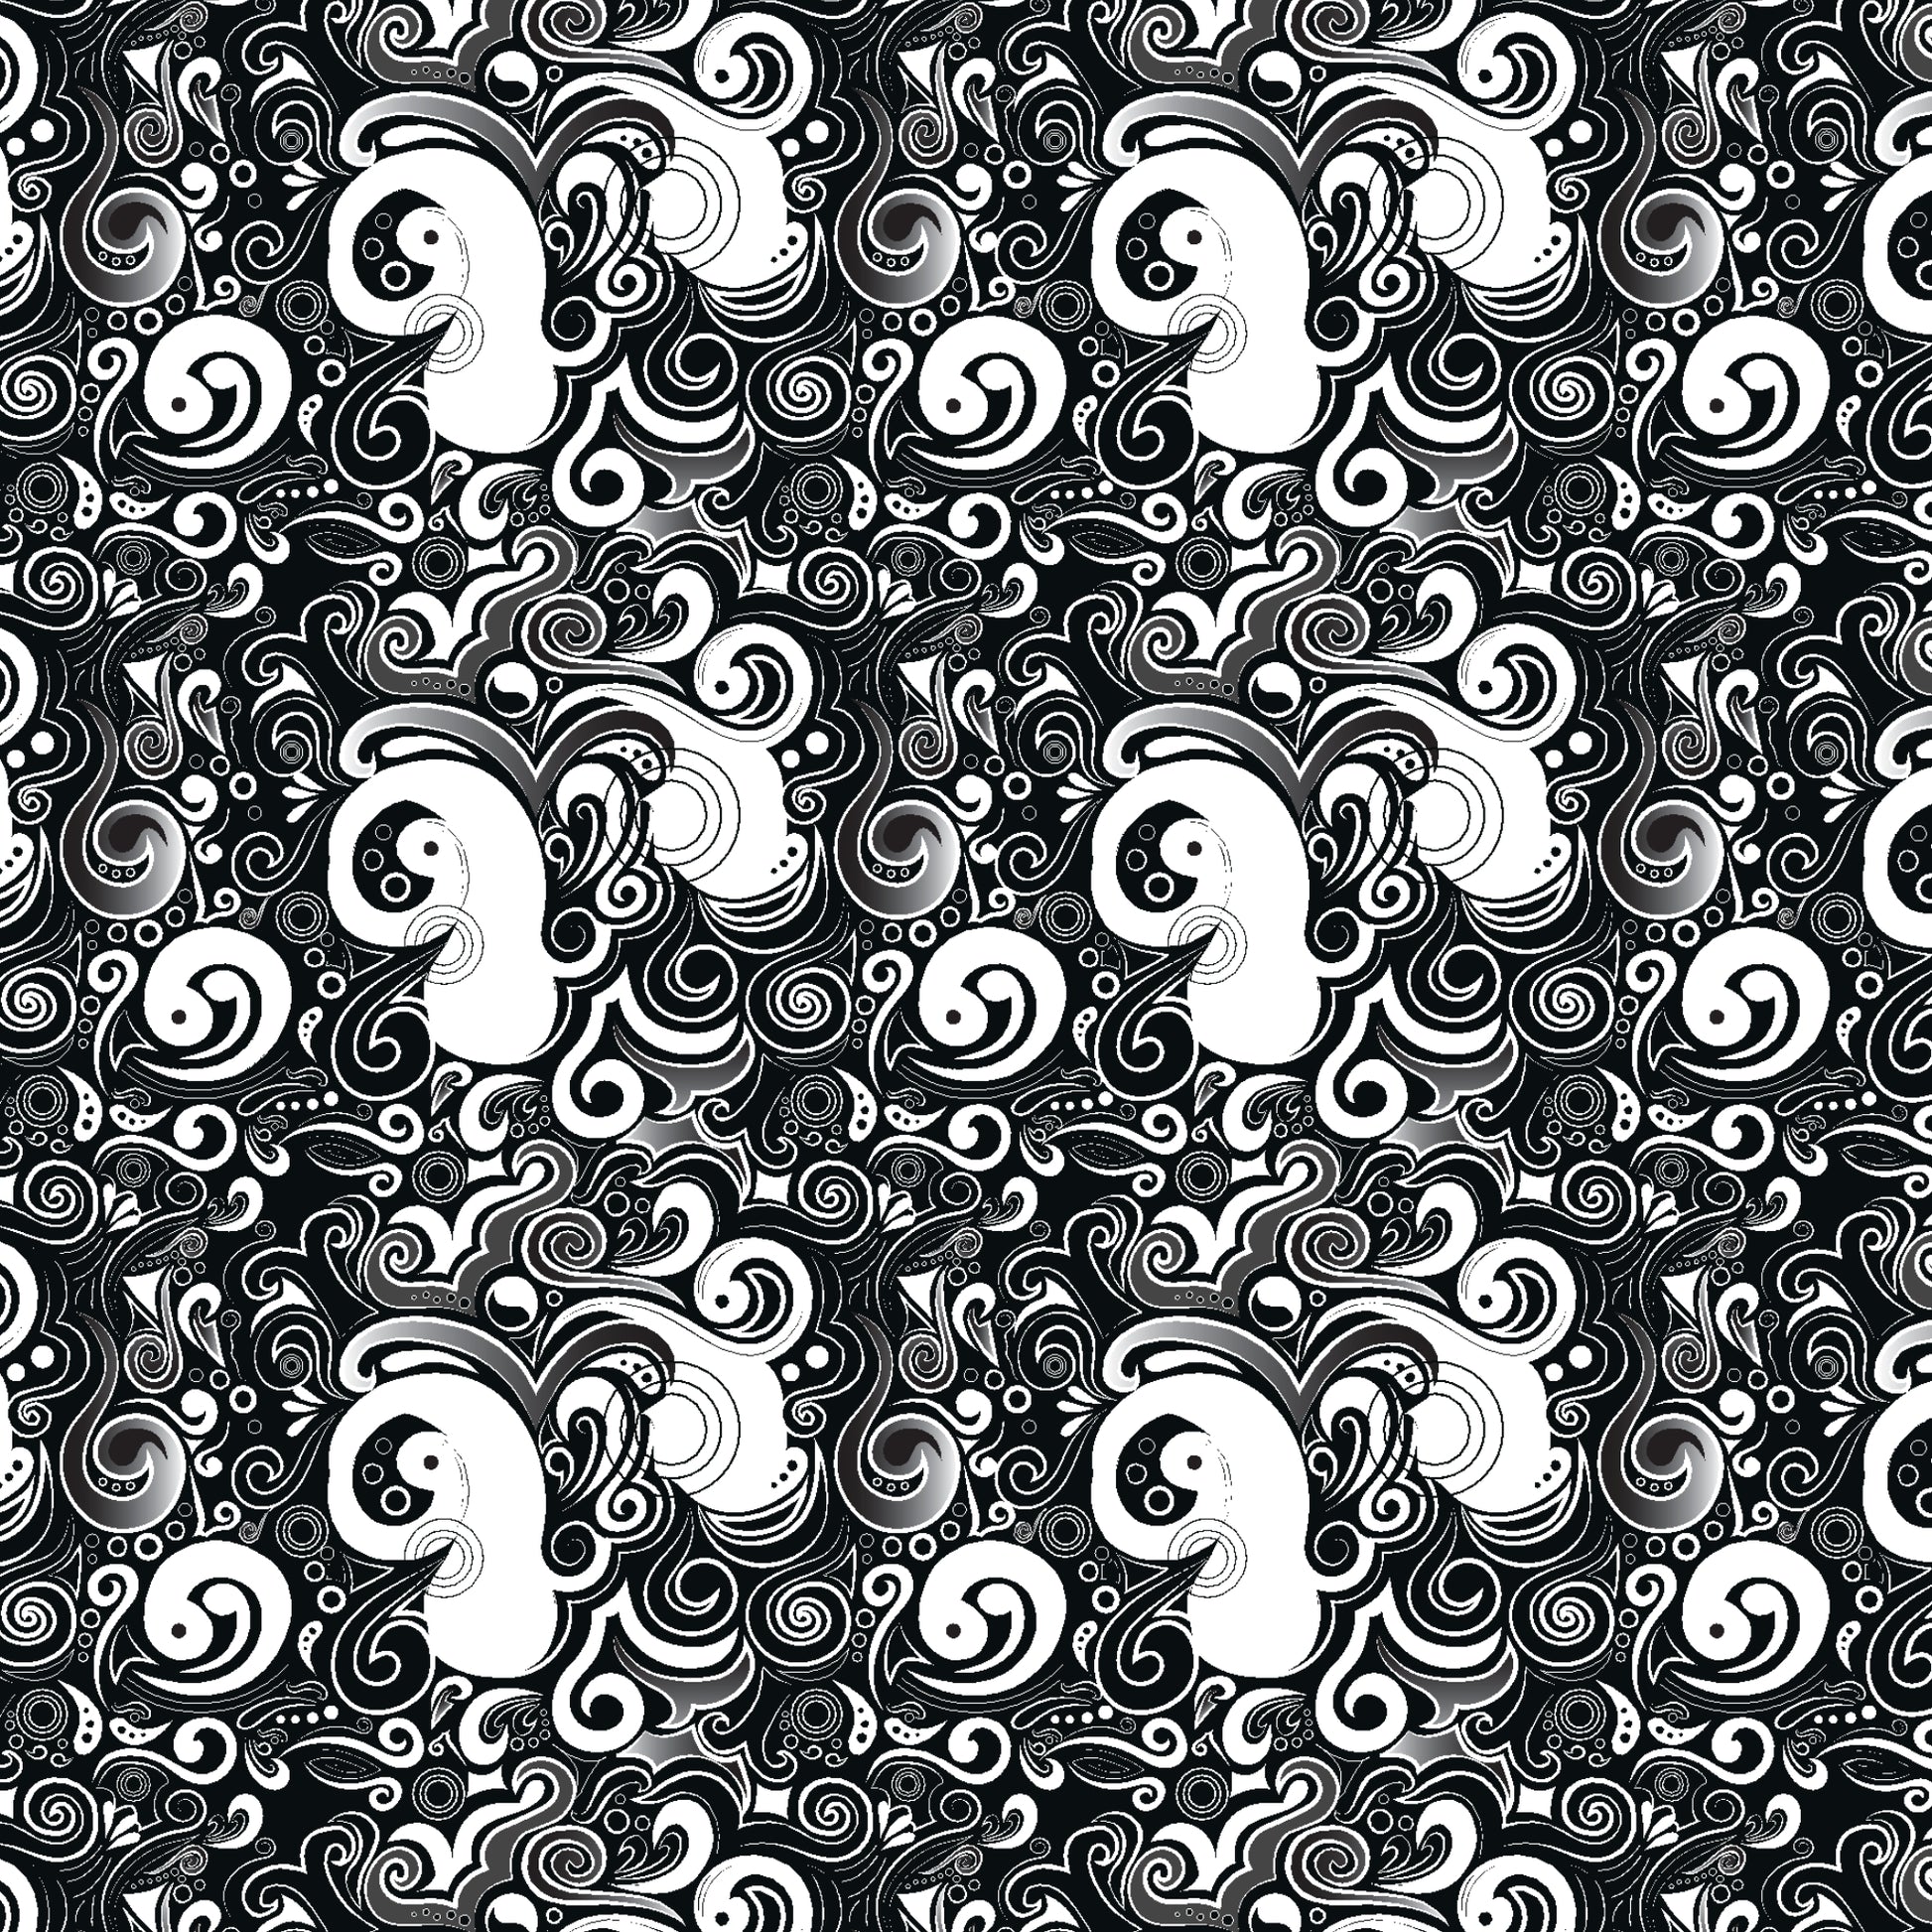 Abstract-Black-White-Psychedelic-Kitsch-RainbowsAndFairies.com.au-ABSTR_ORG-01